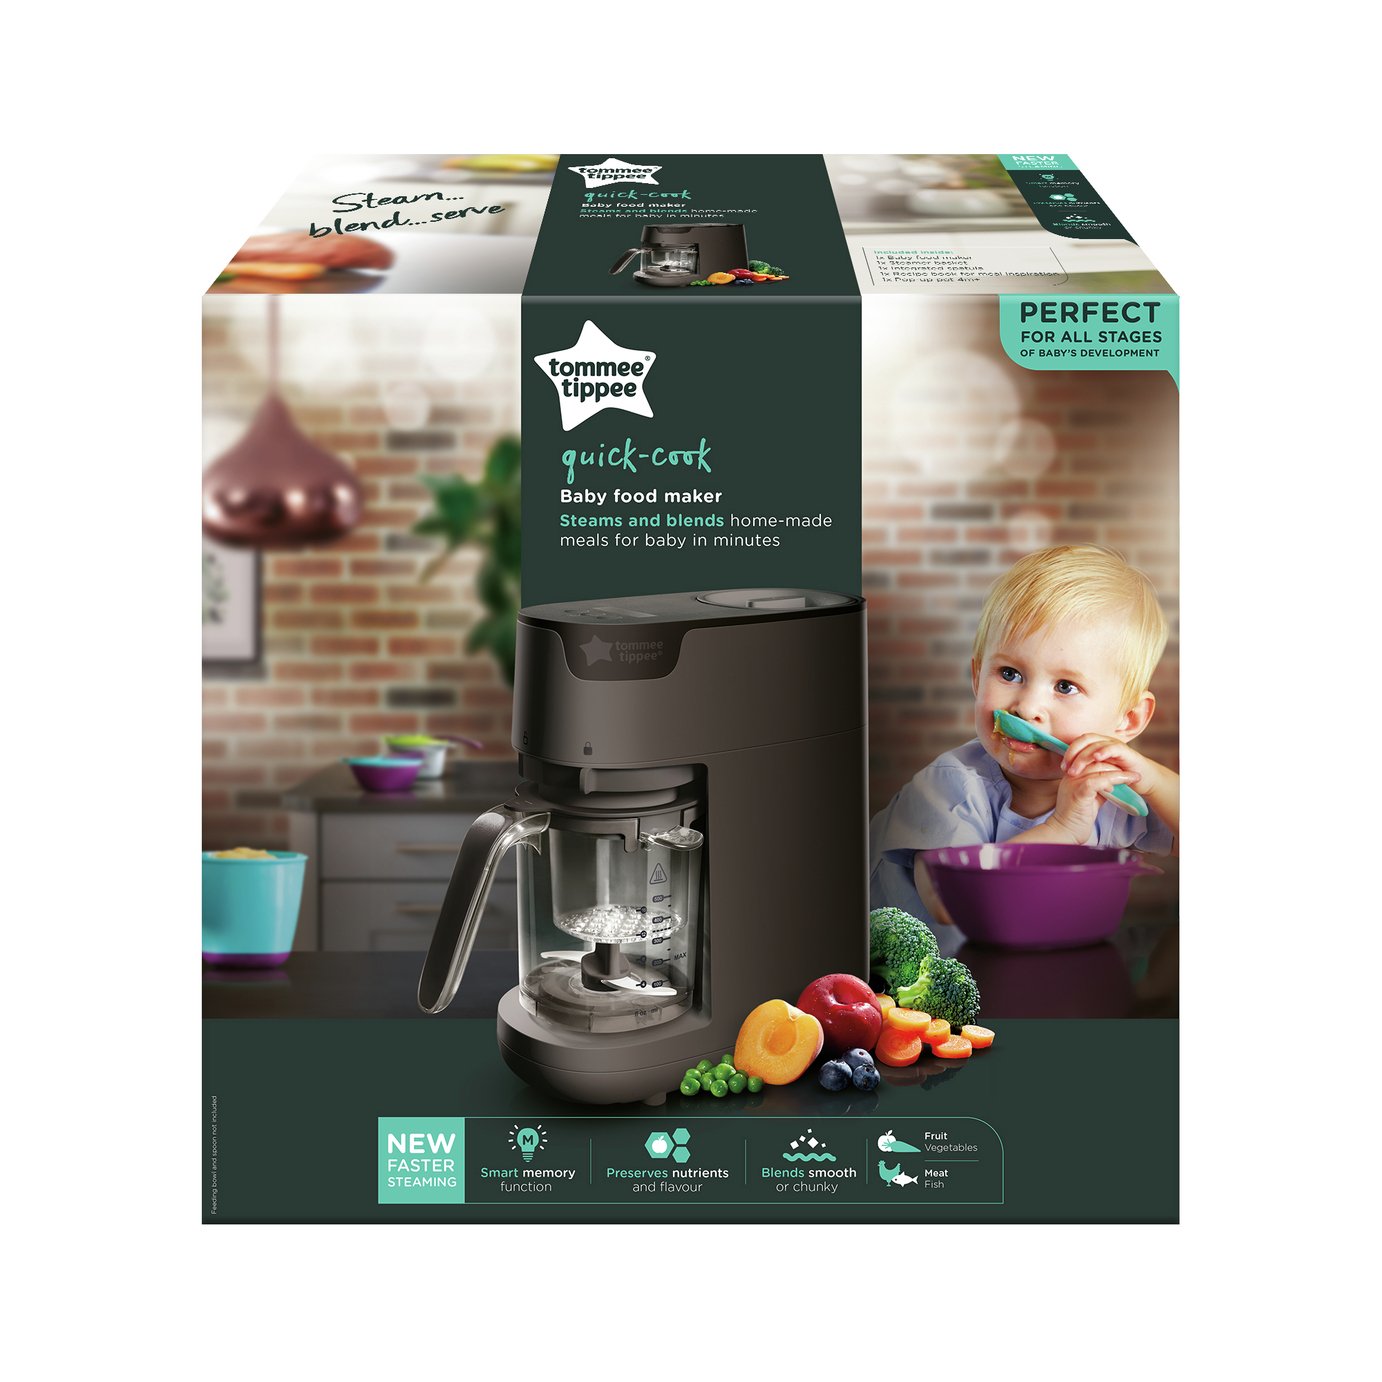 Tommee Tippee Steamer Baby Food Maker Review